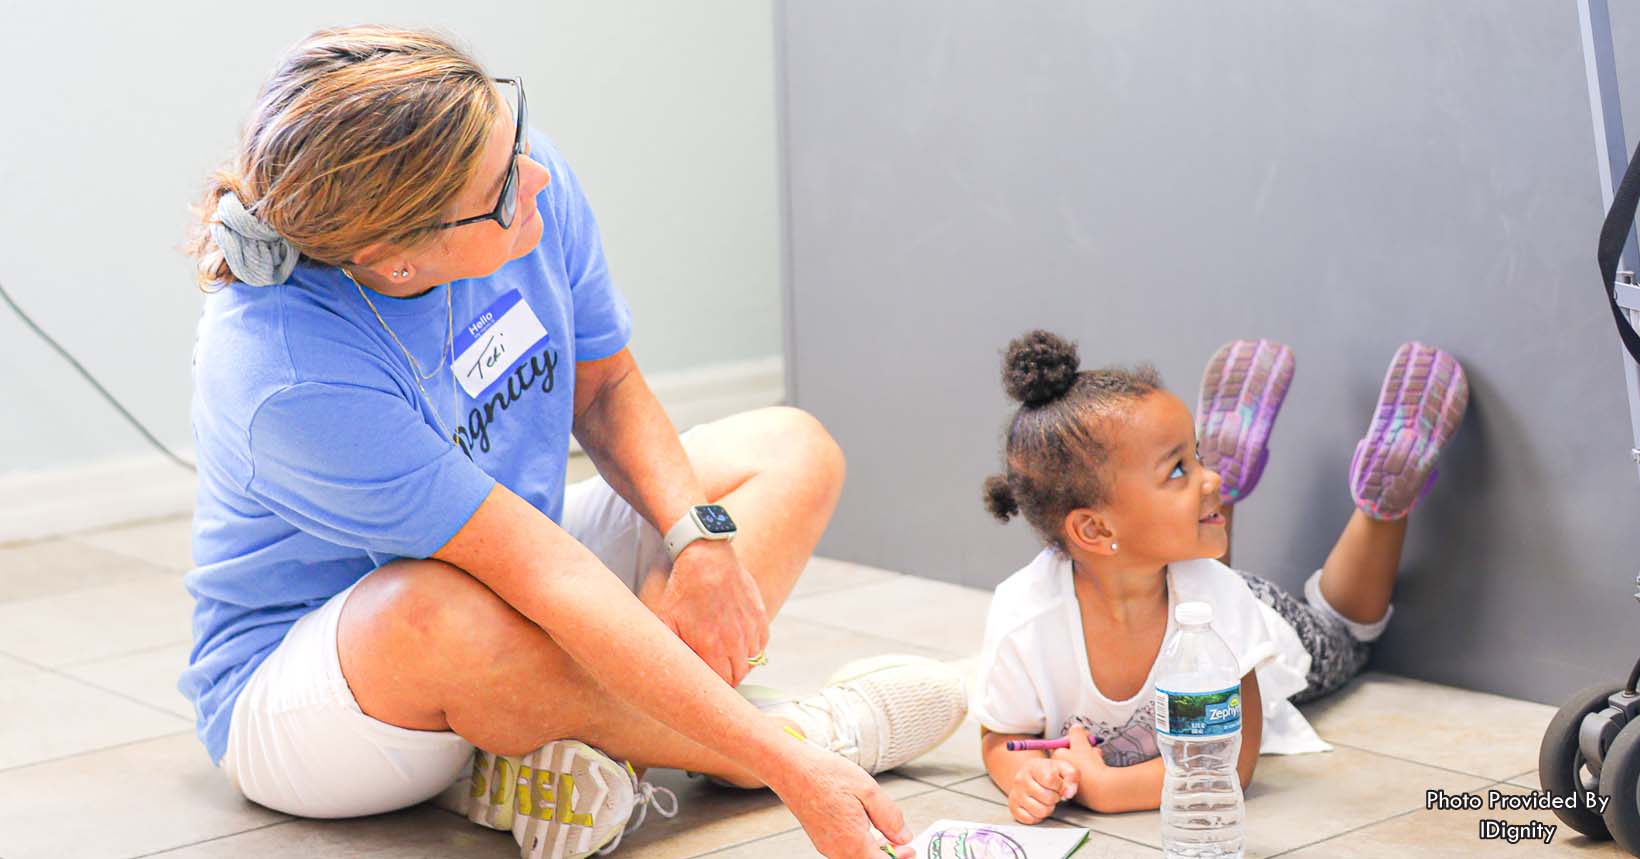 Volunteer Teri sits on the floor with the granddaughter of a client as they work through the process of obtaining her social security card and birth certificate. With these documents, the client and her granddaughter will be able to move out of a shelter into more permanent housing.